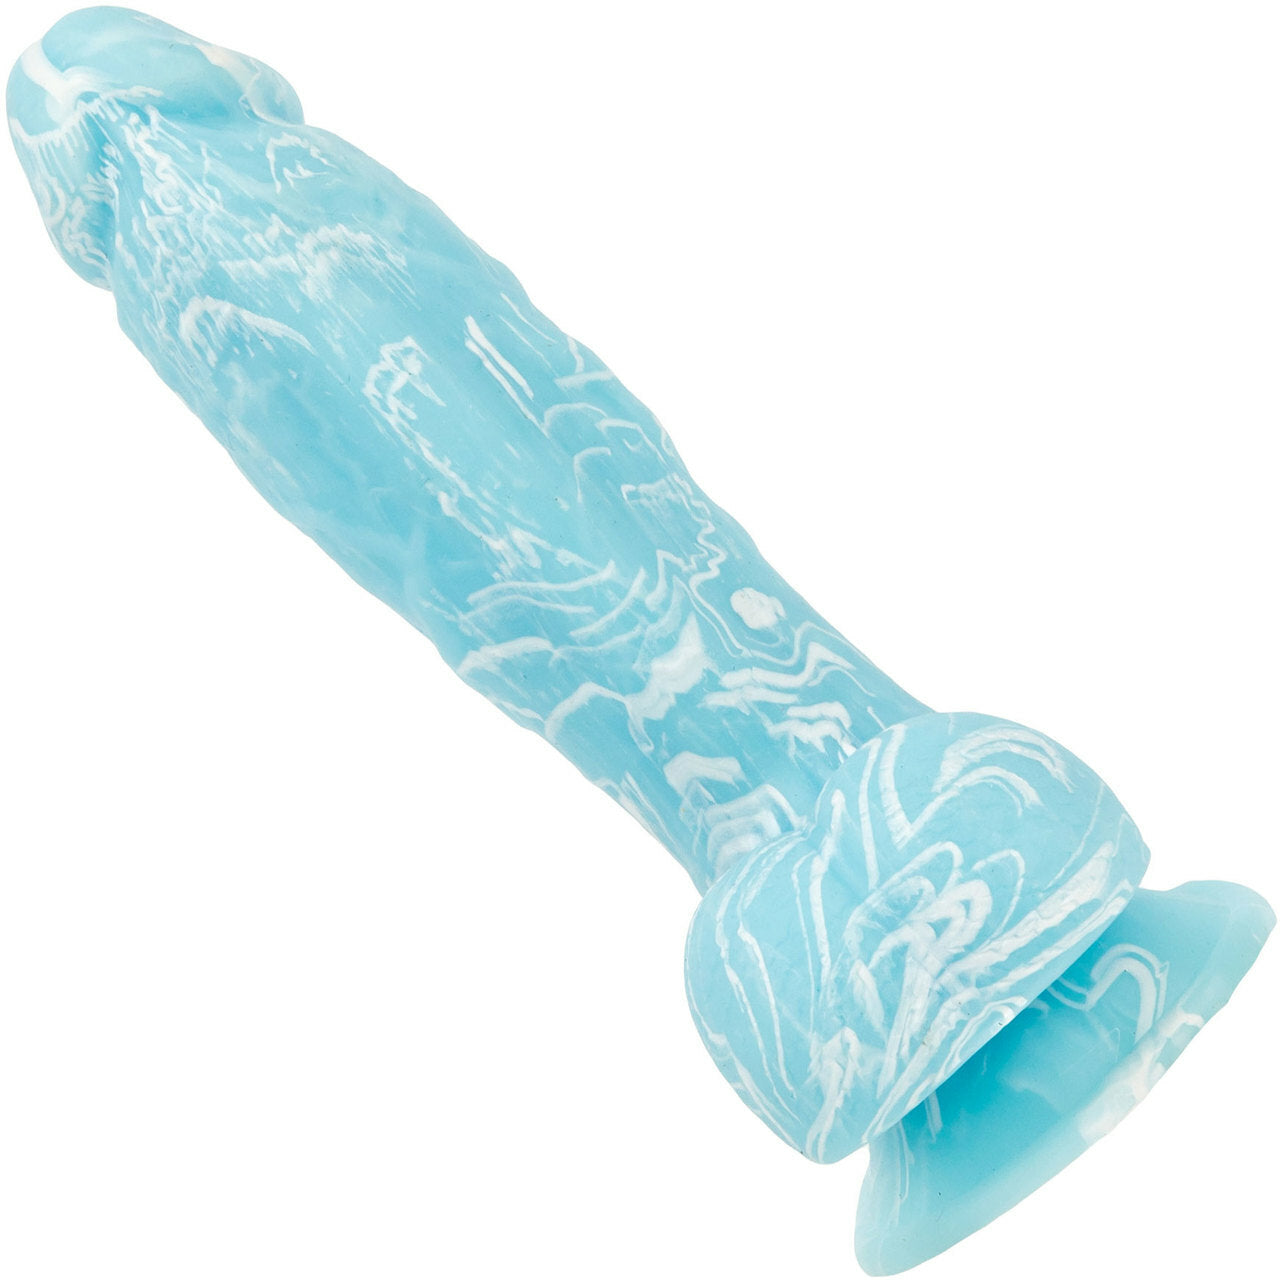 Addiction Luke 7.5" Glow-in-the-Dark Dildo With Balls - Blue - Thorn & Feather Sex Toy Canada